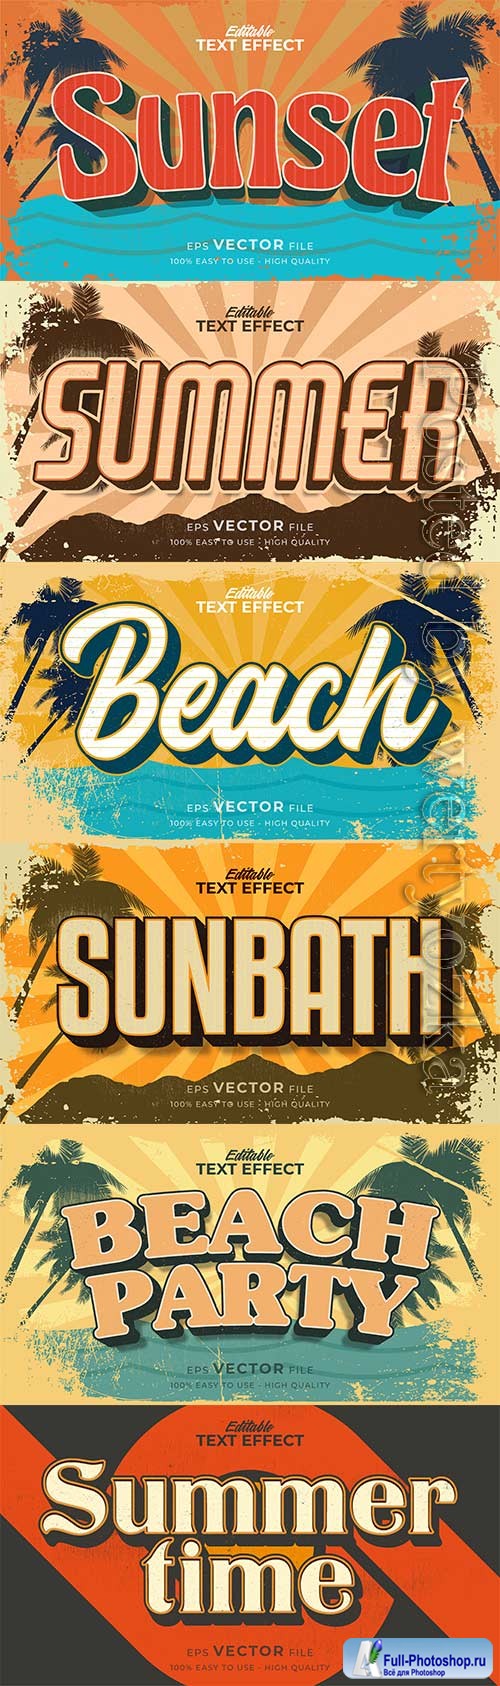 Retro summer holiday text in grunge style theme in vector vol 6